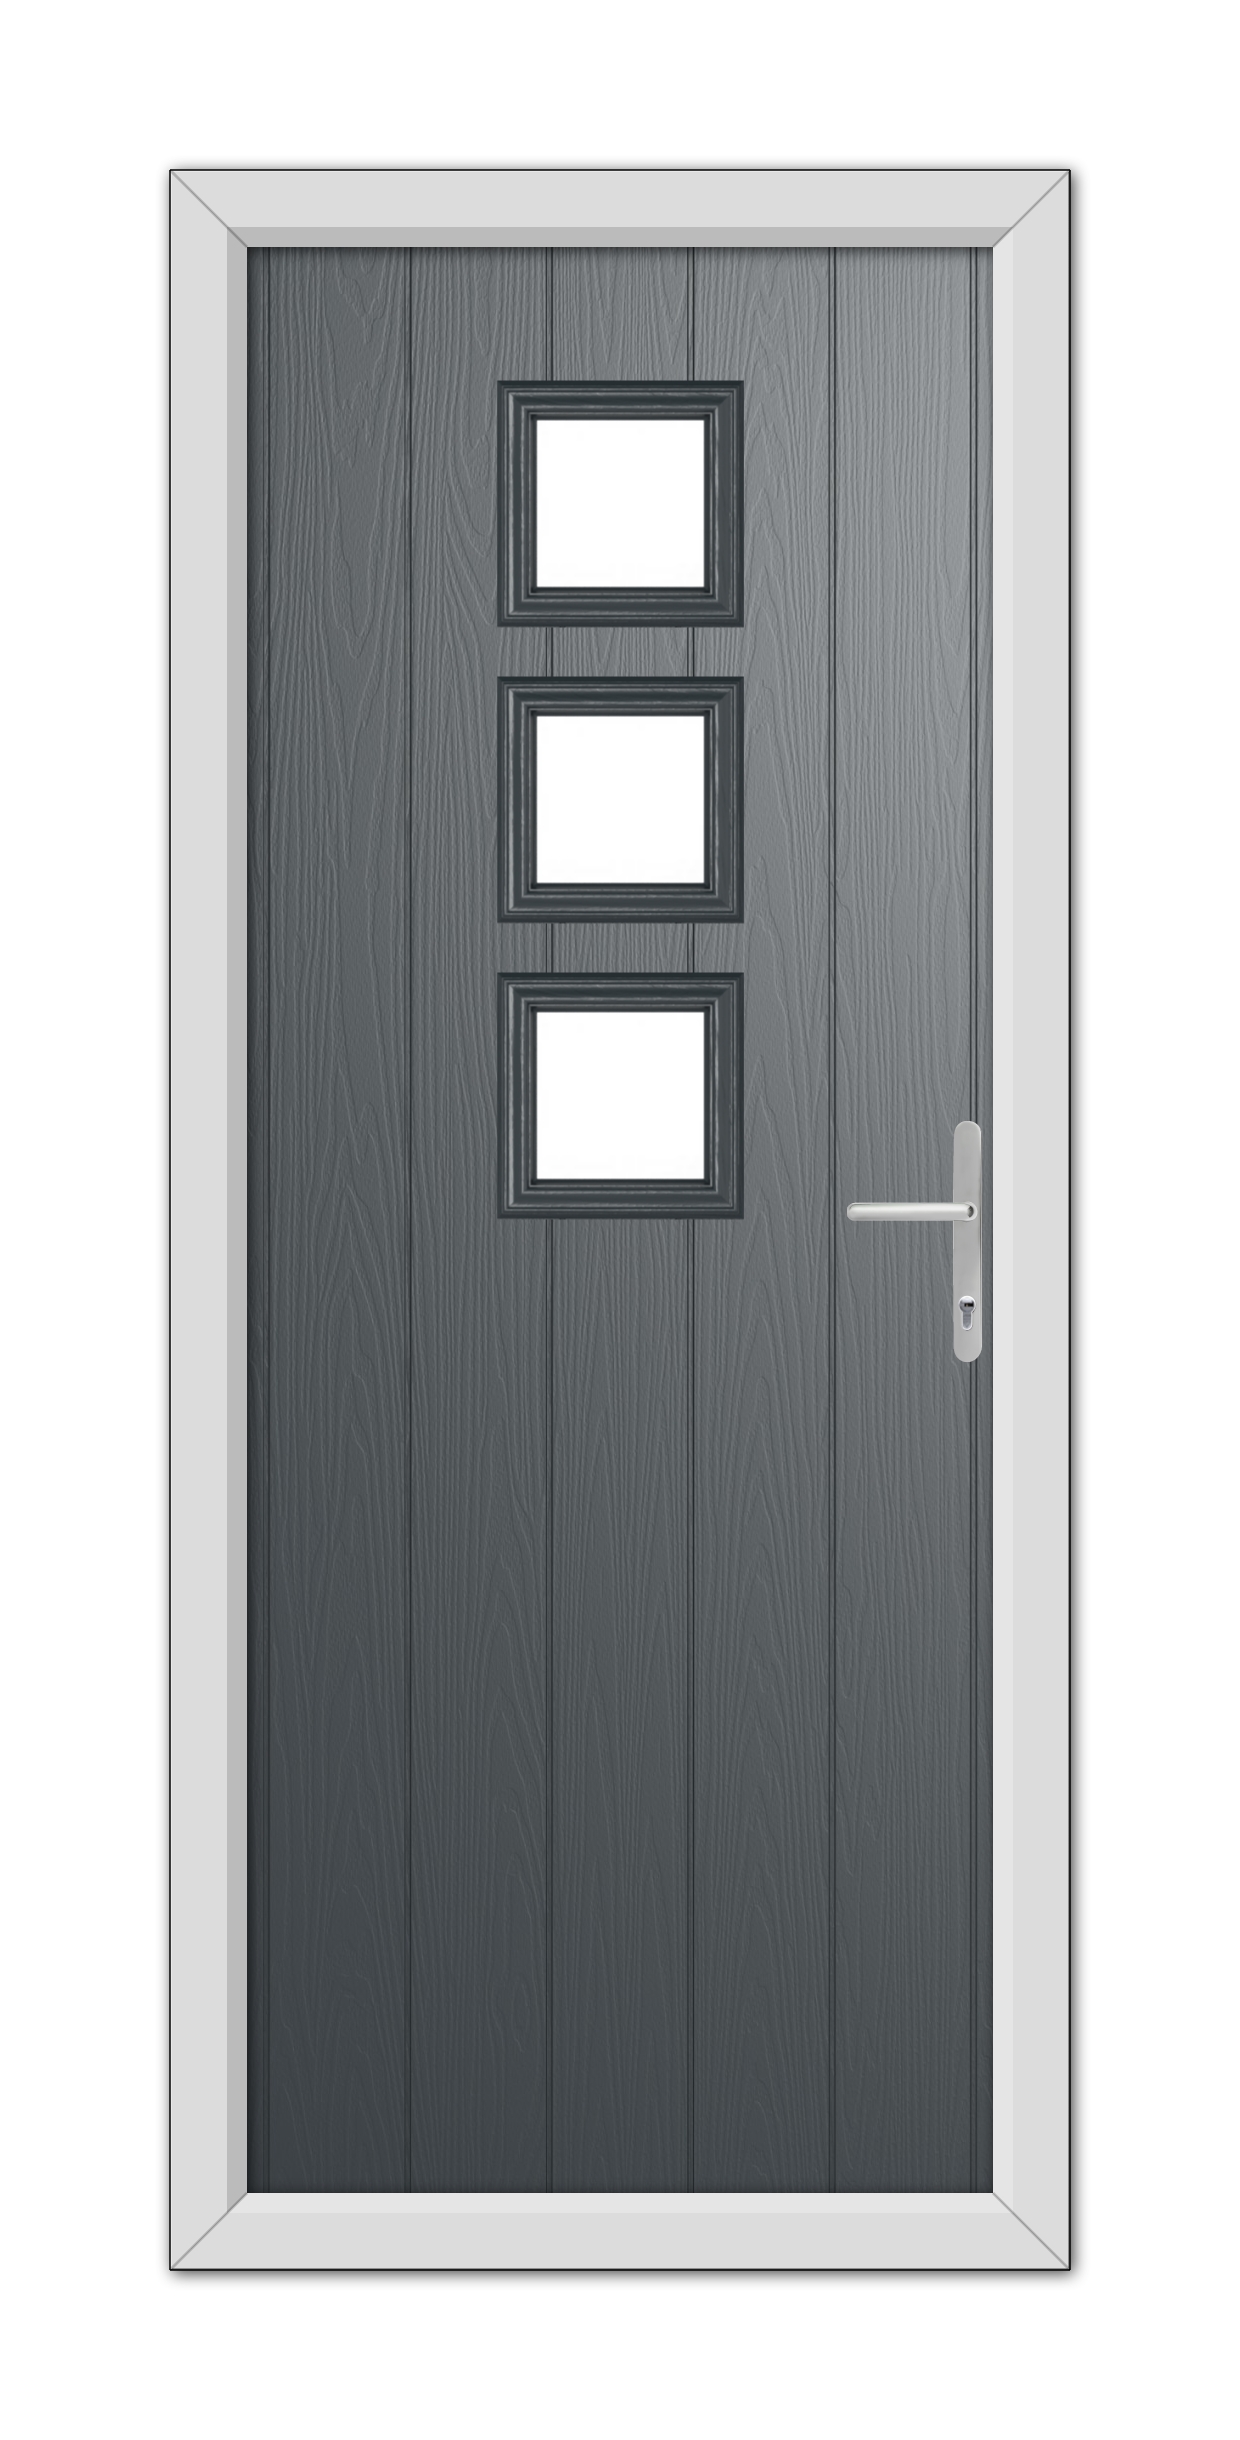 A modern Anthracite Grey Montrose Composite Door 48mm Timber Core with three rectangular glass panels and a silver handle, set within a light gray frame.